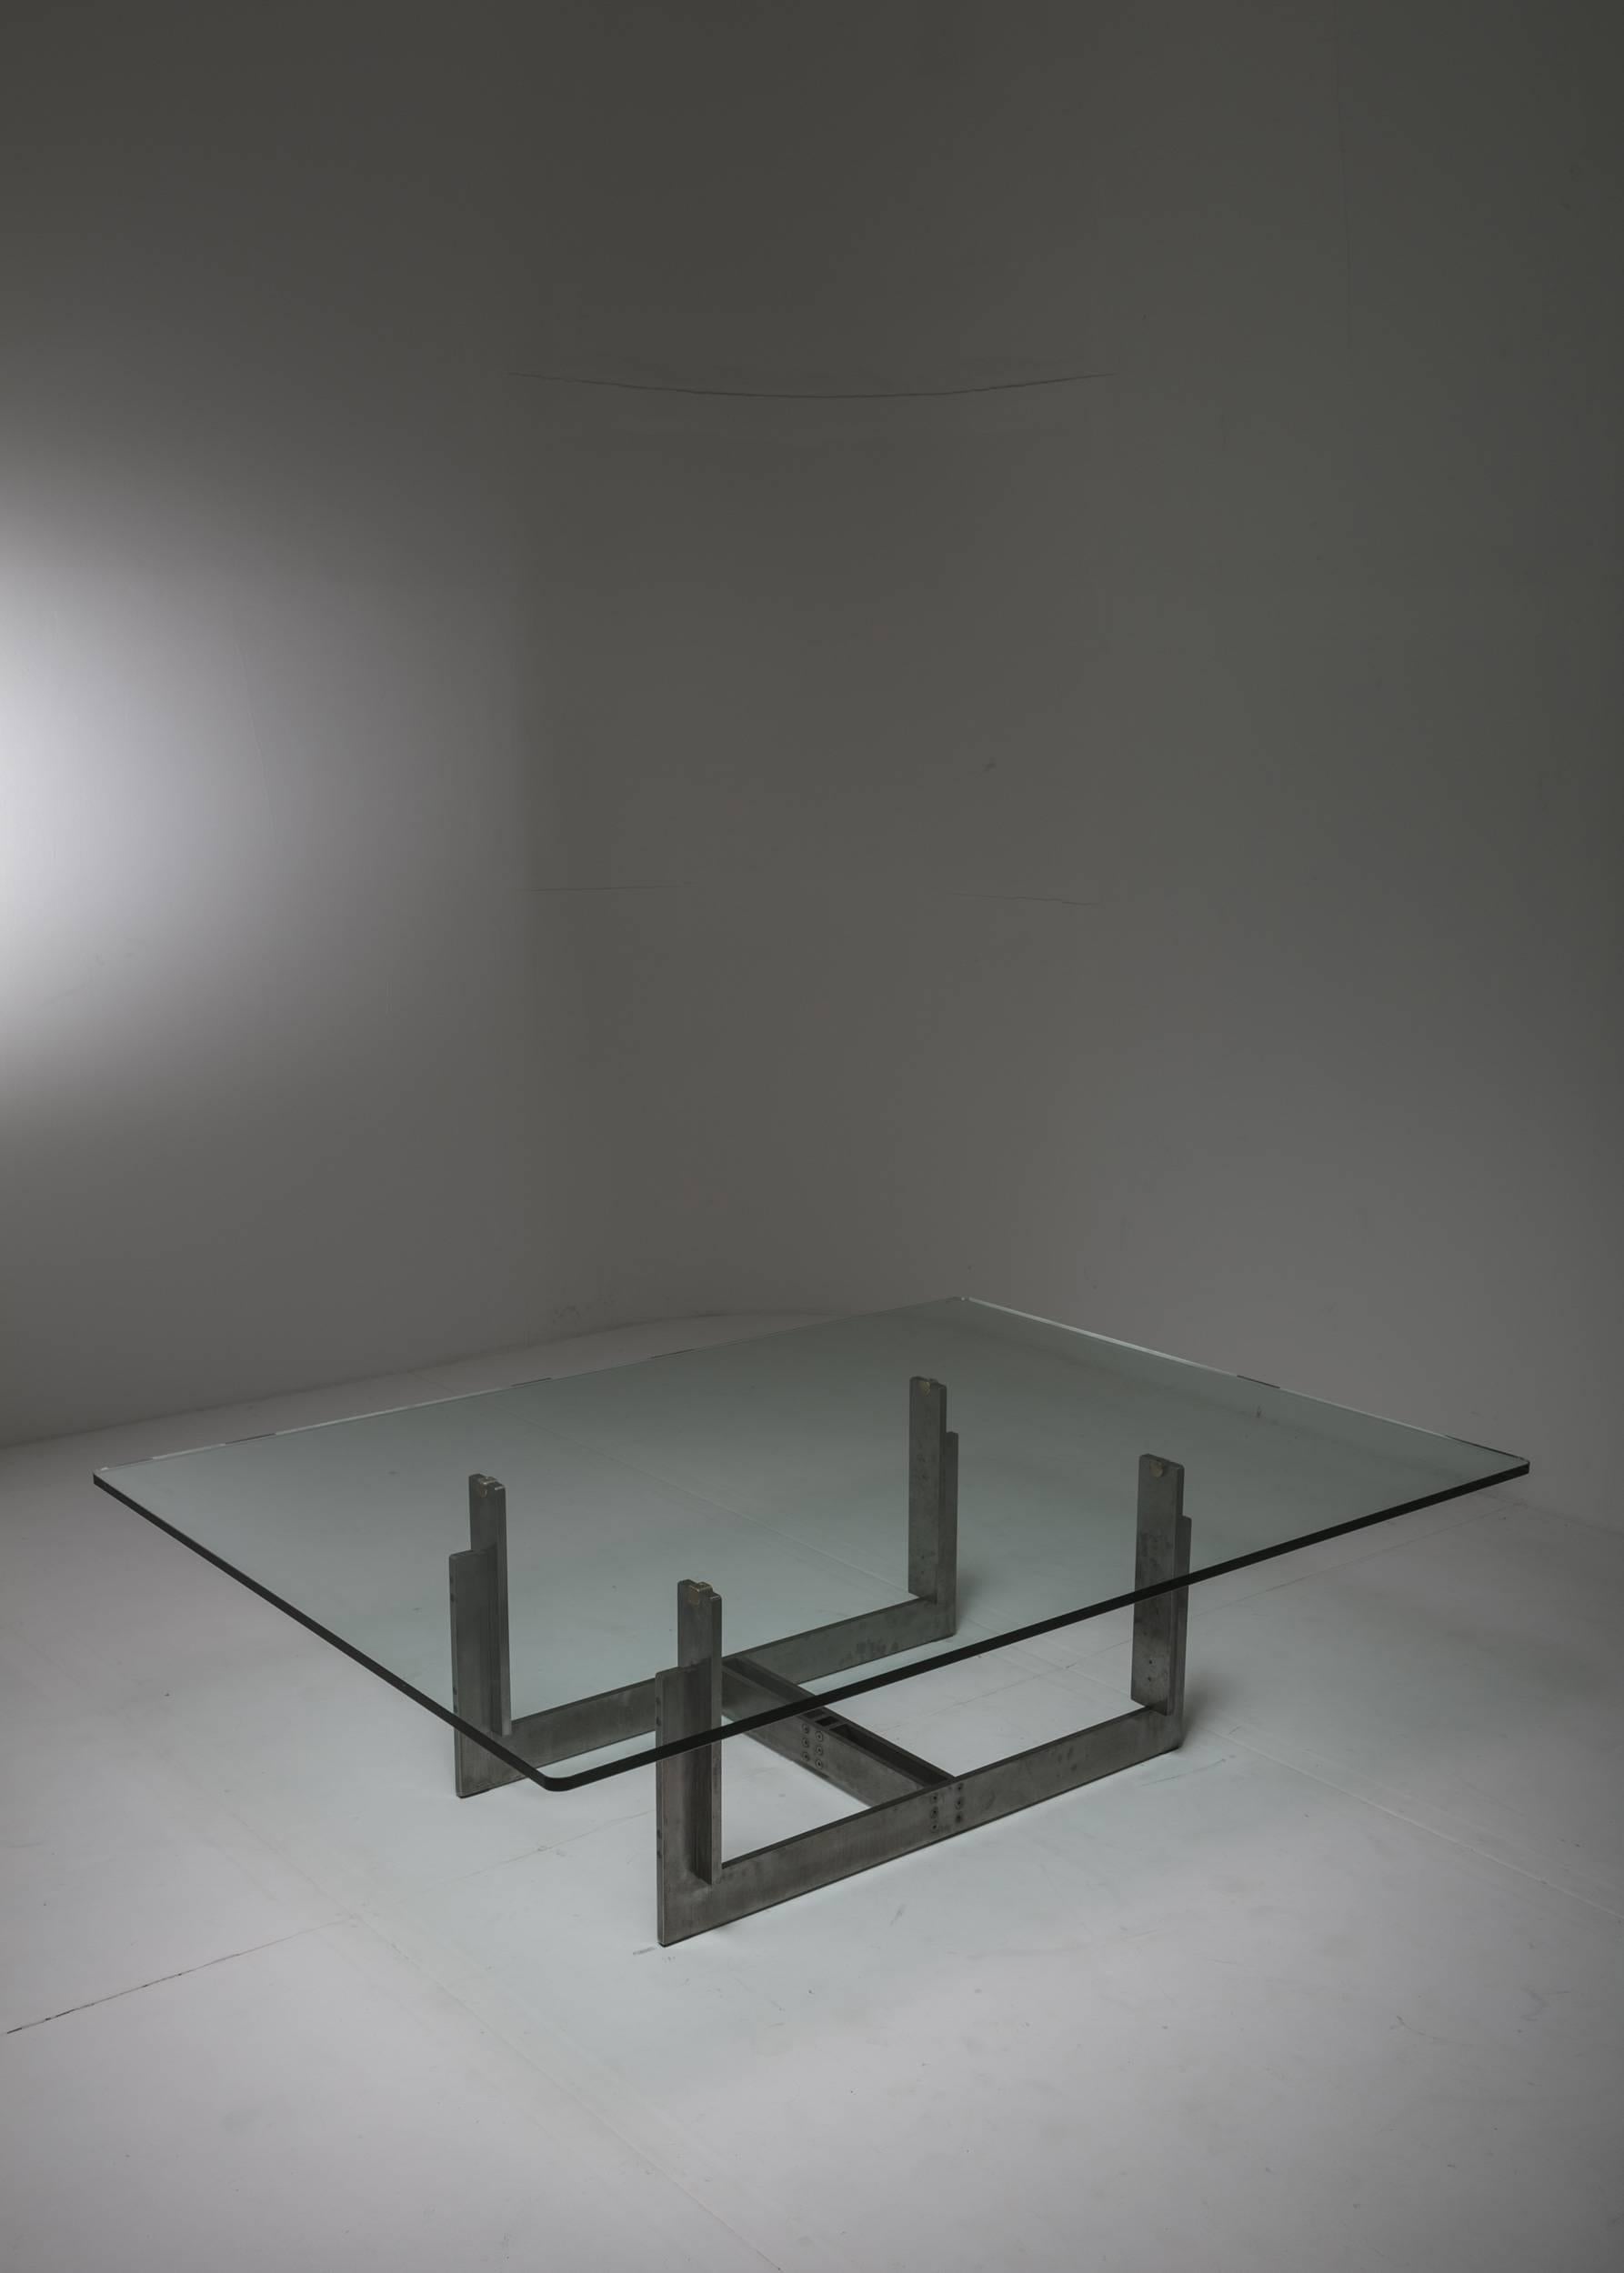 Remarkable Sarpi low table by Carlo Scarpa for Simon.
Small-scale architecture with drawn brushed metal frame held together with visible burnished screws.